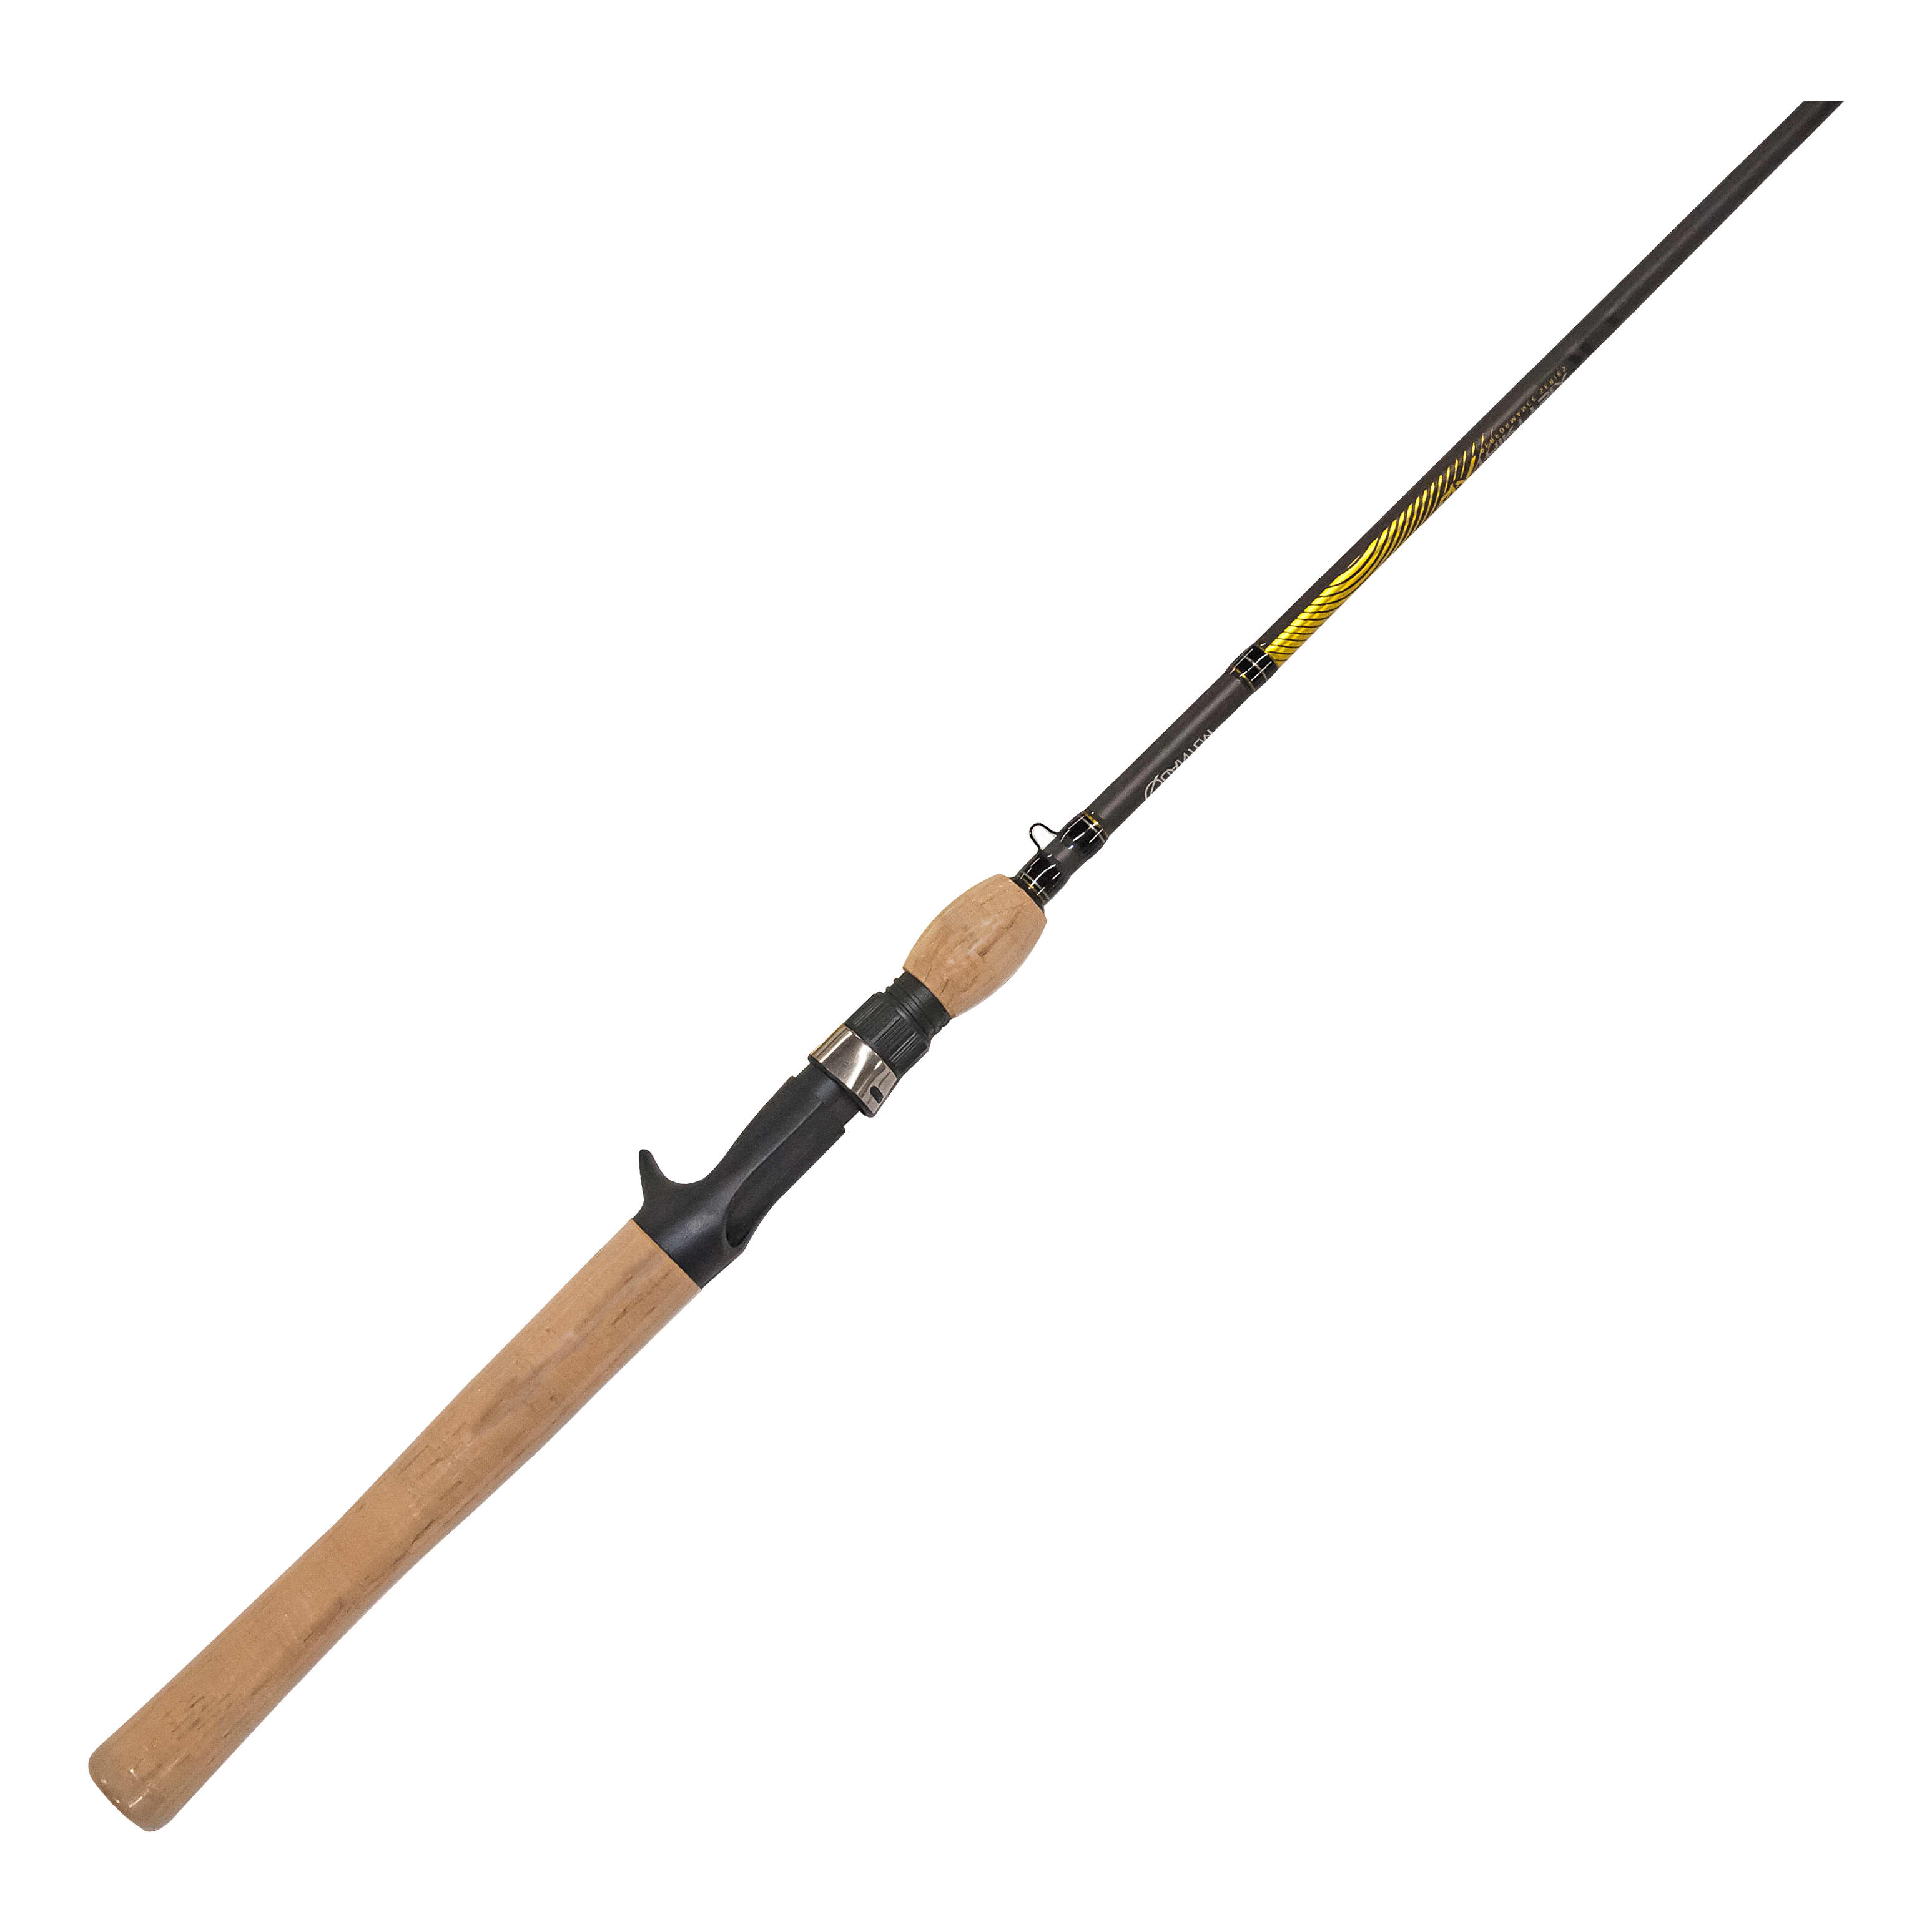 SHAKESPEARE UGLY STIK CAL 1100 M 7' - 1 Piece Casting Fishing Rod Perfect  Clean $69.97 - PicClick